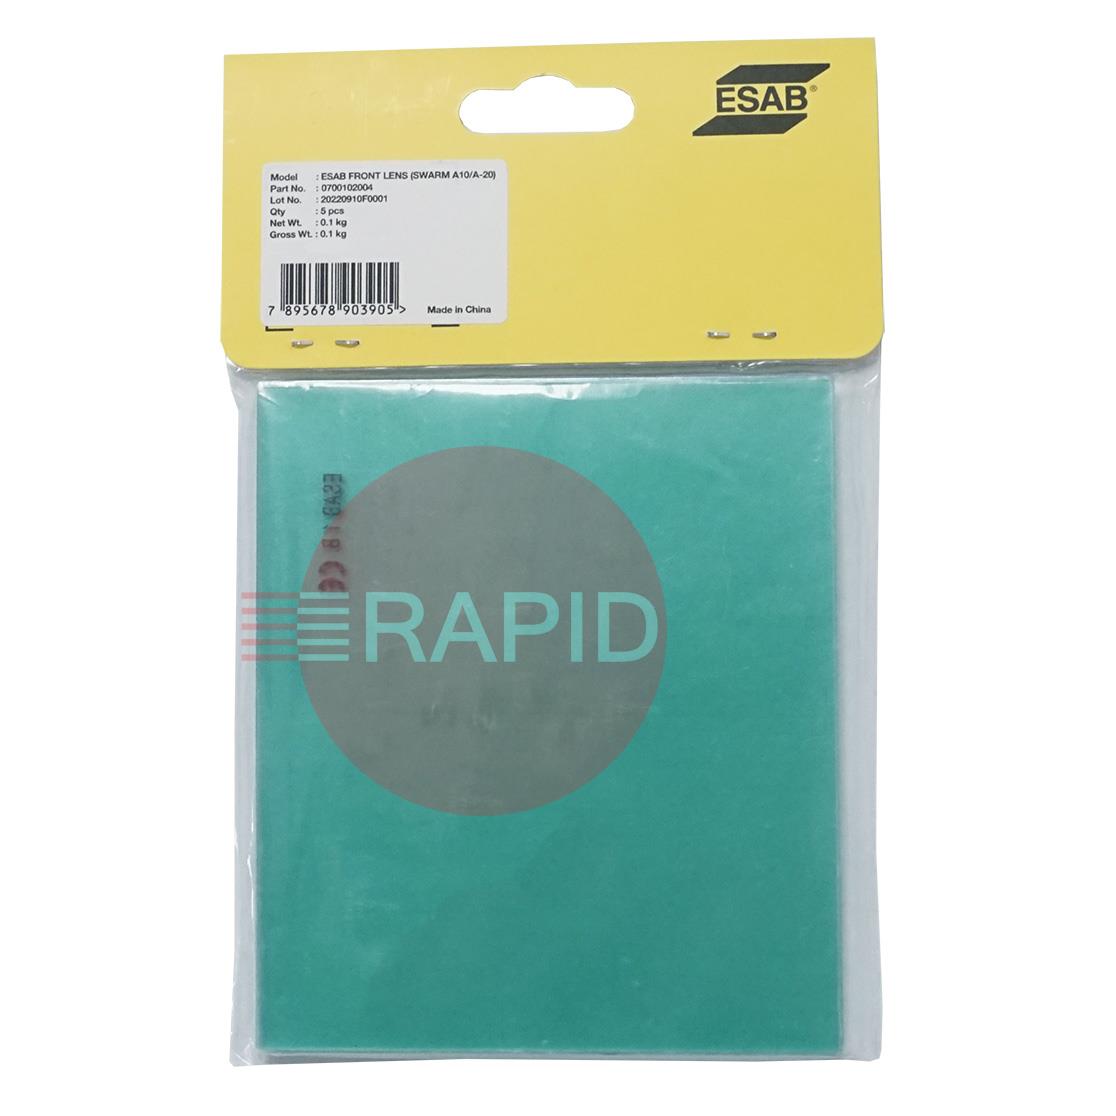 0700102004  ESAB Swarm A10 / A20 Front Cover Lens (Pack of 5)